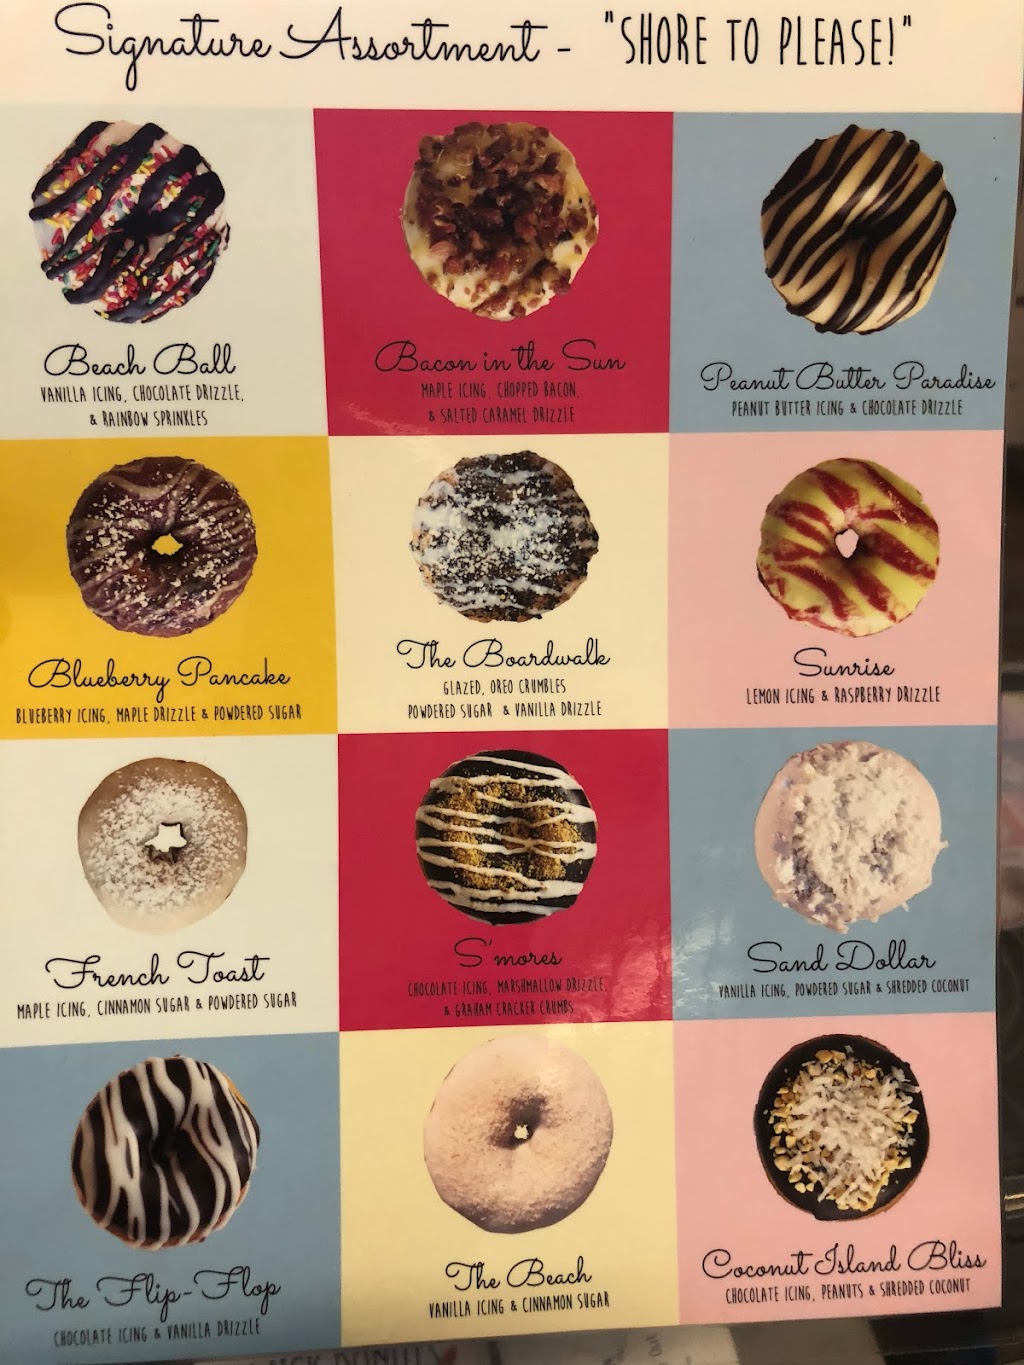 Duck Donuts Made To Order Donuts And Thrifty Ice Cream - bakery  | Photo 5 of 10 | Address: 18591 Main St, Huntington Beach, CA 92648, USA | Phone: (714) 375-5430